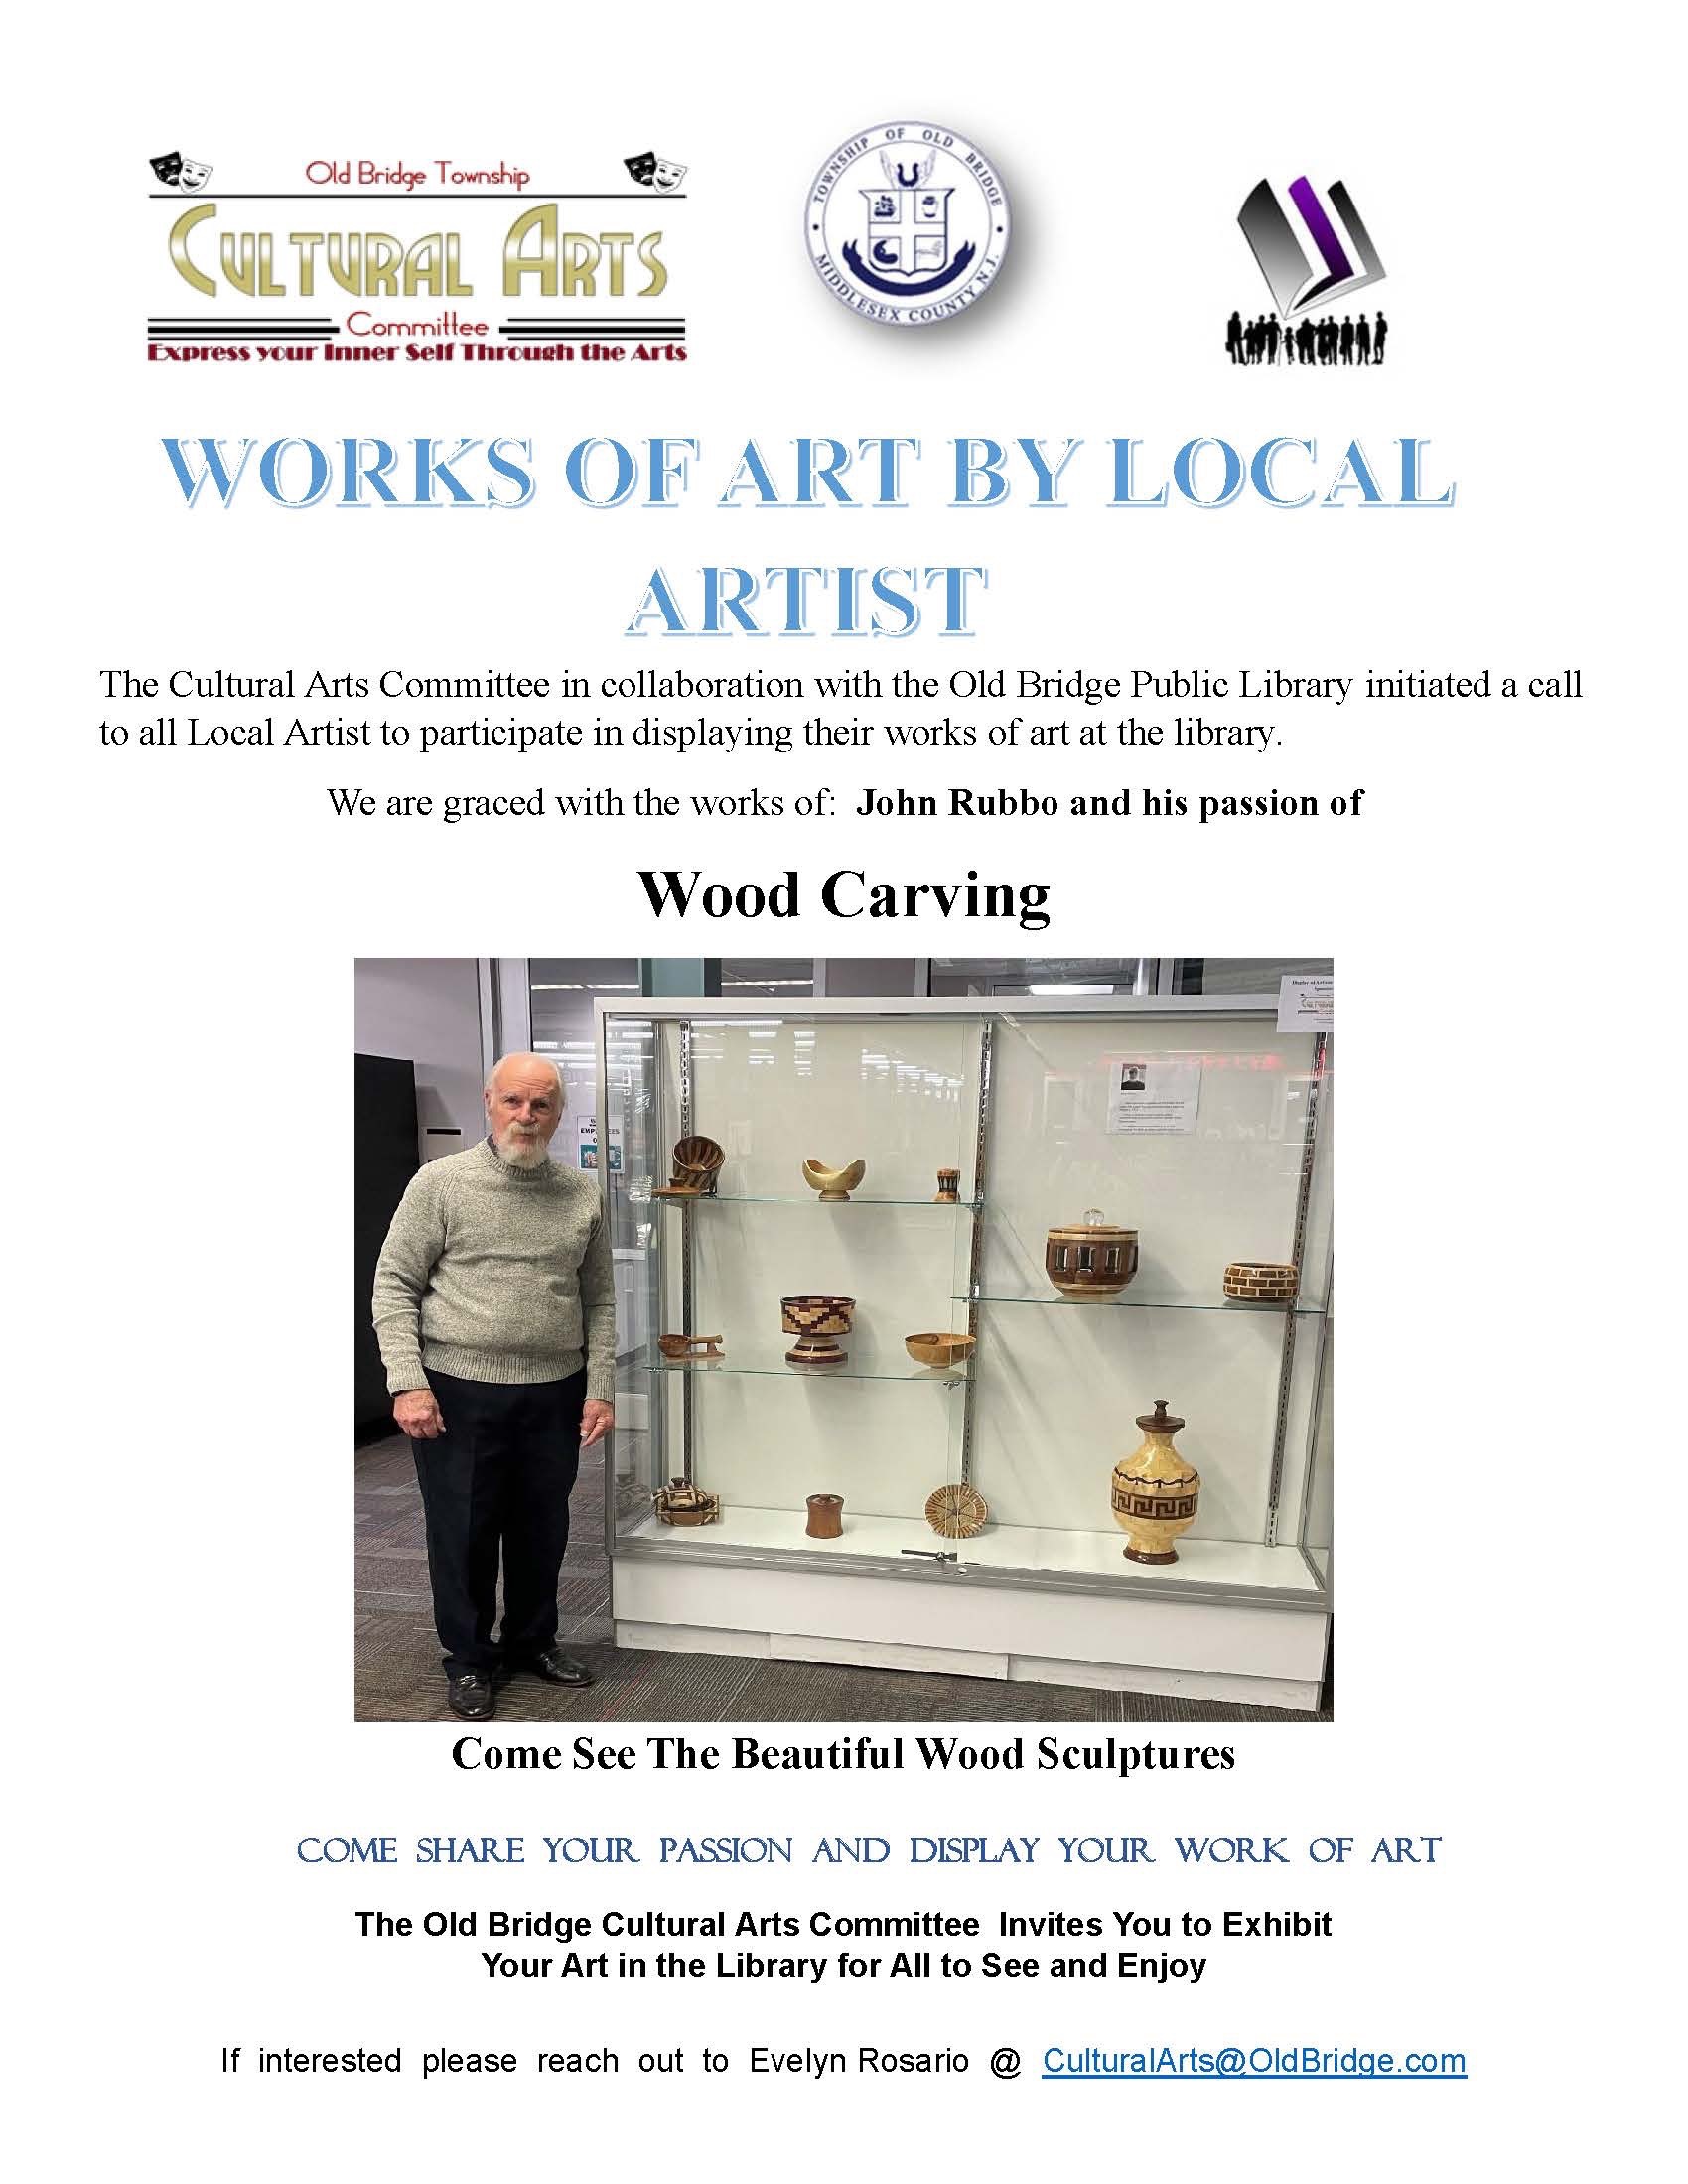 WORKS OF ART BY LOCAL ARTIST The Cultural Arts Committee in collaboration with the Old Bridge Public Library initiated a call to all Local Artist to participate in displaying their works of art at the library. We are graced with the works of: John Rubbo and his passion of Wood Carving. Come See The Beautiful Wood Sculptures COME SHARE YOUR PASSION AND DISPLAY YOUR WORK OF ART The Old Bridge Cultural Arts Committee Invites You to Exhibit Your Art in the Library for All to See and Enjoy If interested please reach out to Evelyn Rosario CulturalArts@OldBridge.com